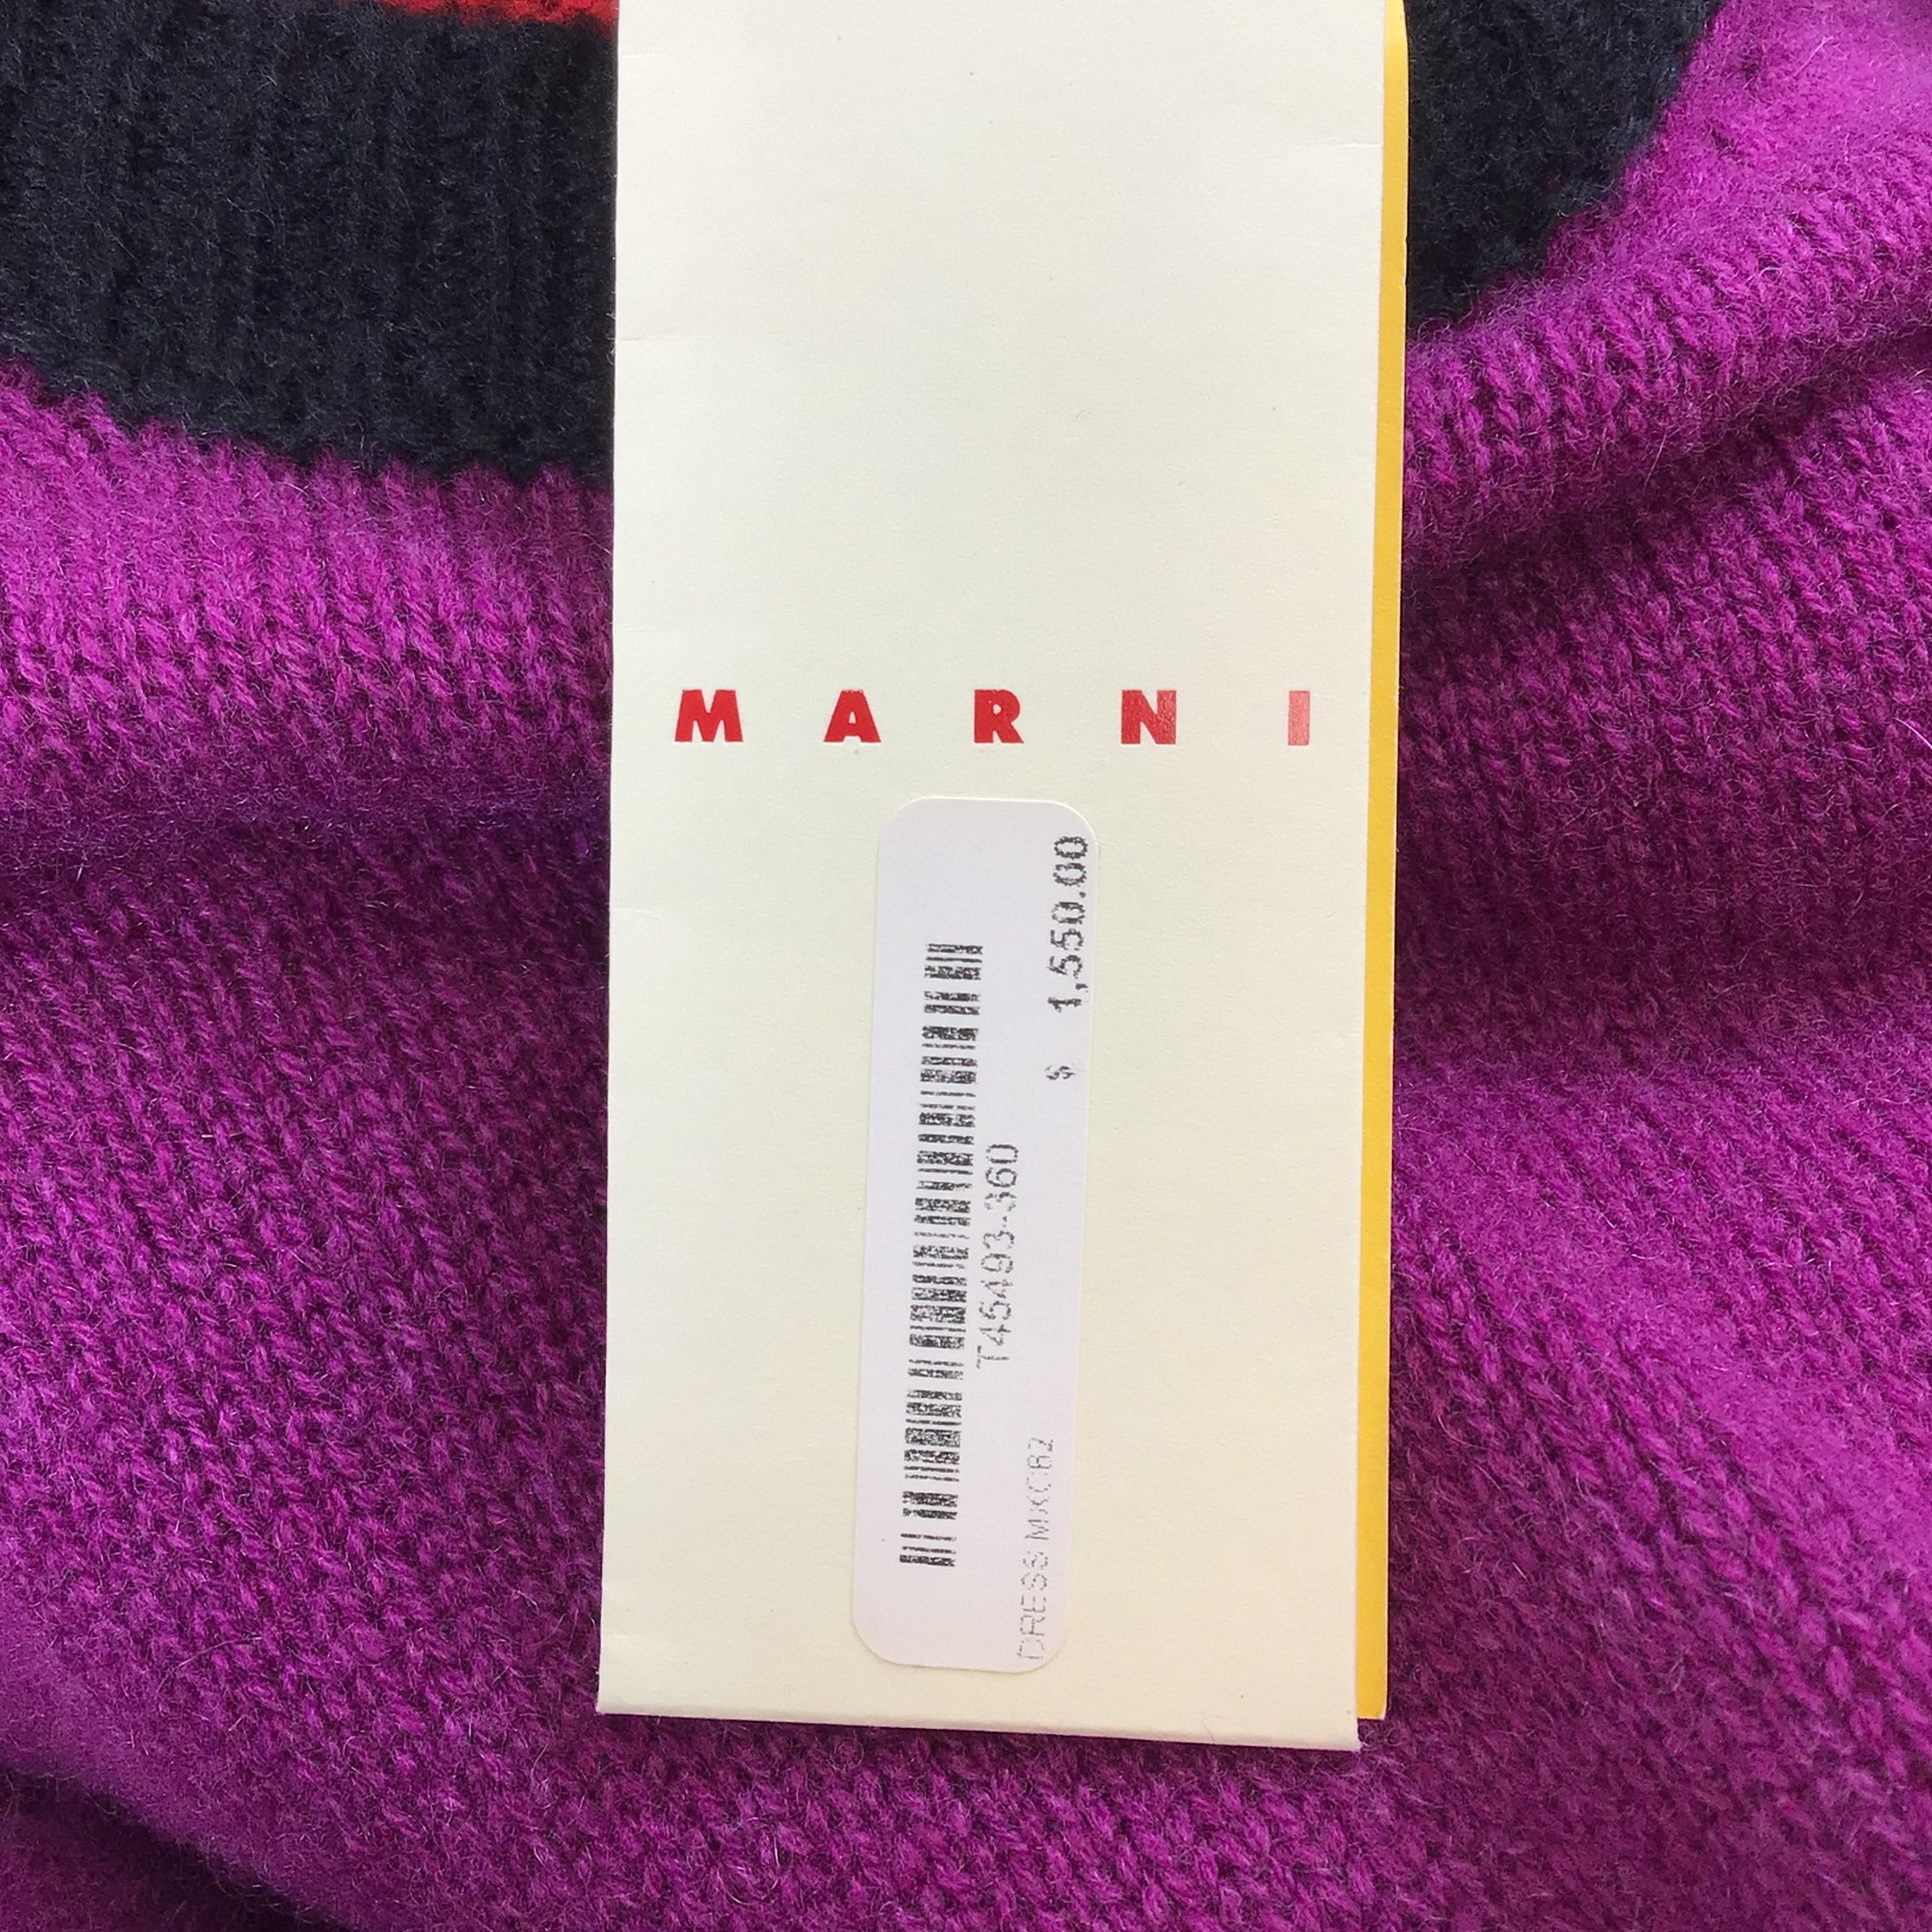 Marni Red / Purple / Black 2022 Colorblock Long Sleeved Cashmere Knit Sweater Dress